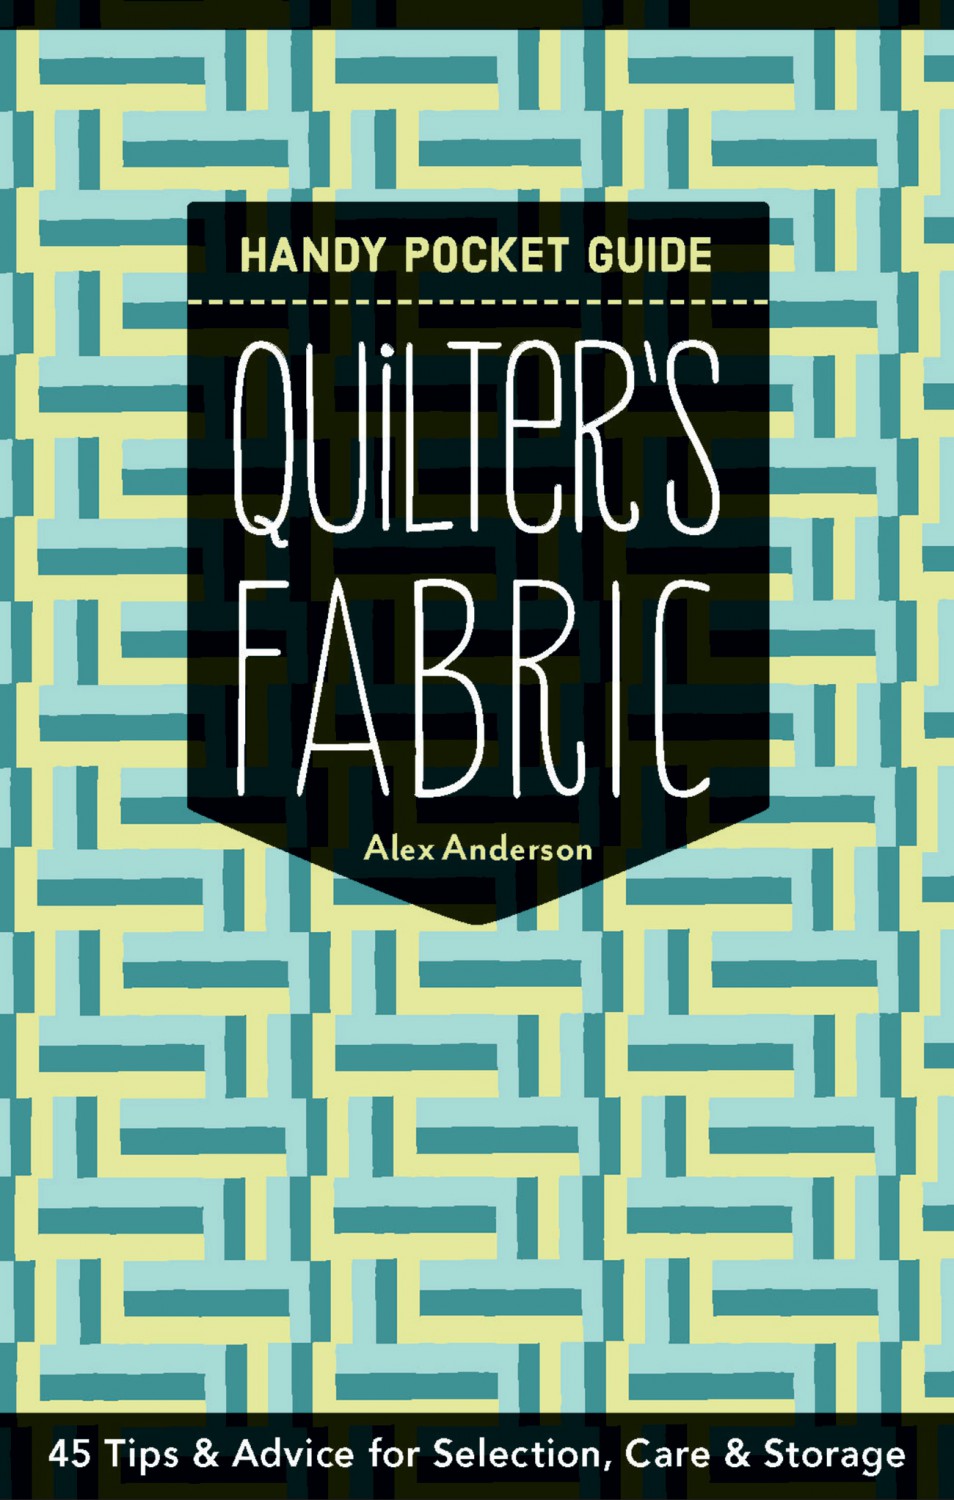 Quilters Fabric Handy Pocket Guide (Softcover) (5863160774821)